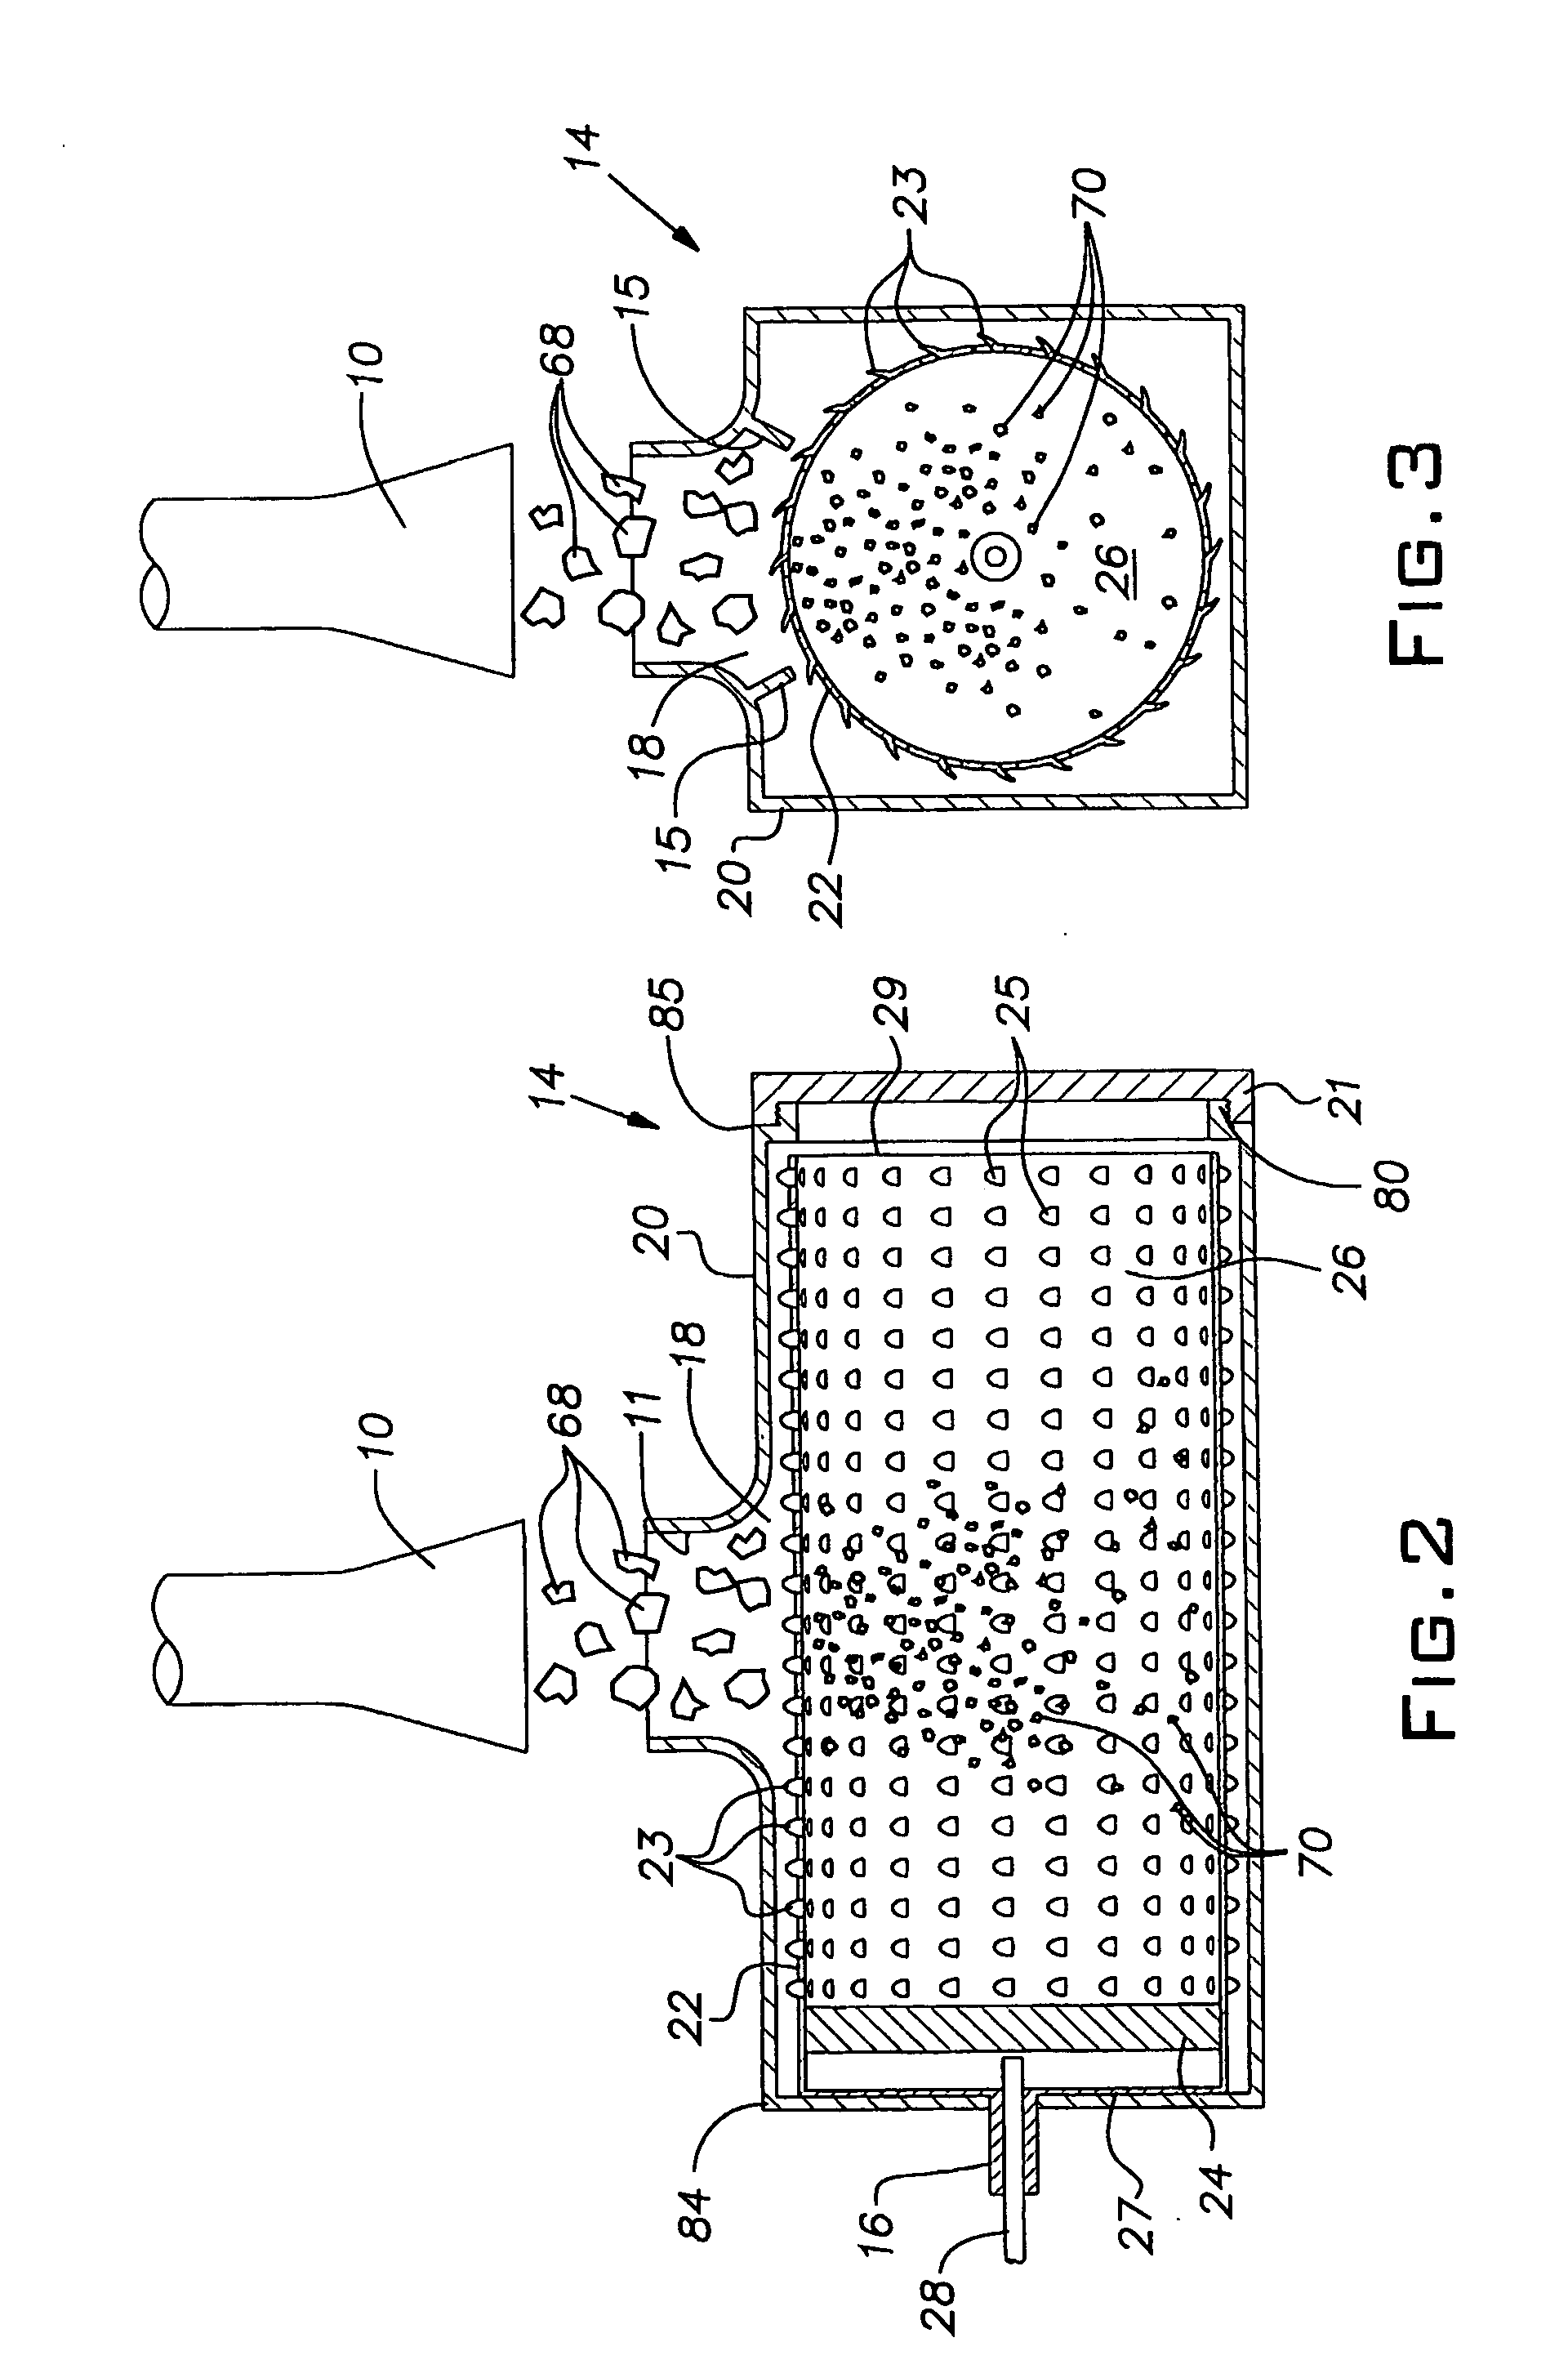 Compositions, methods and apparatus for surgical procedures